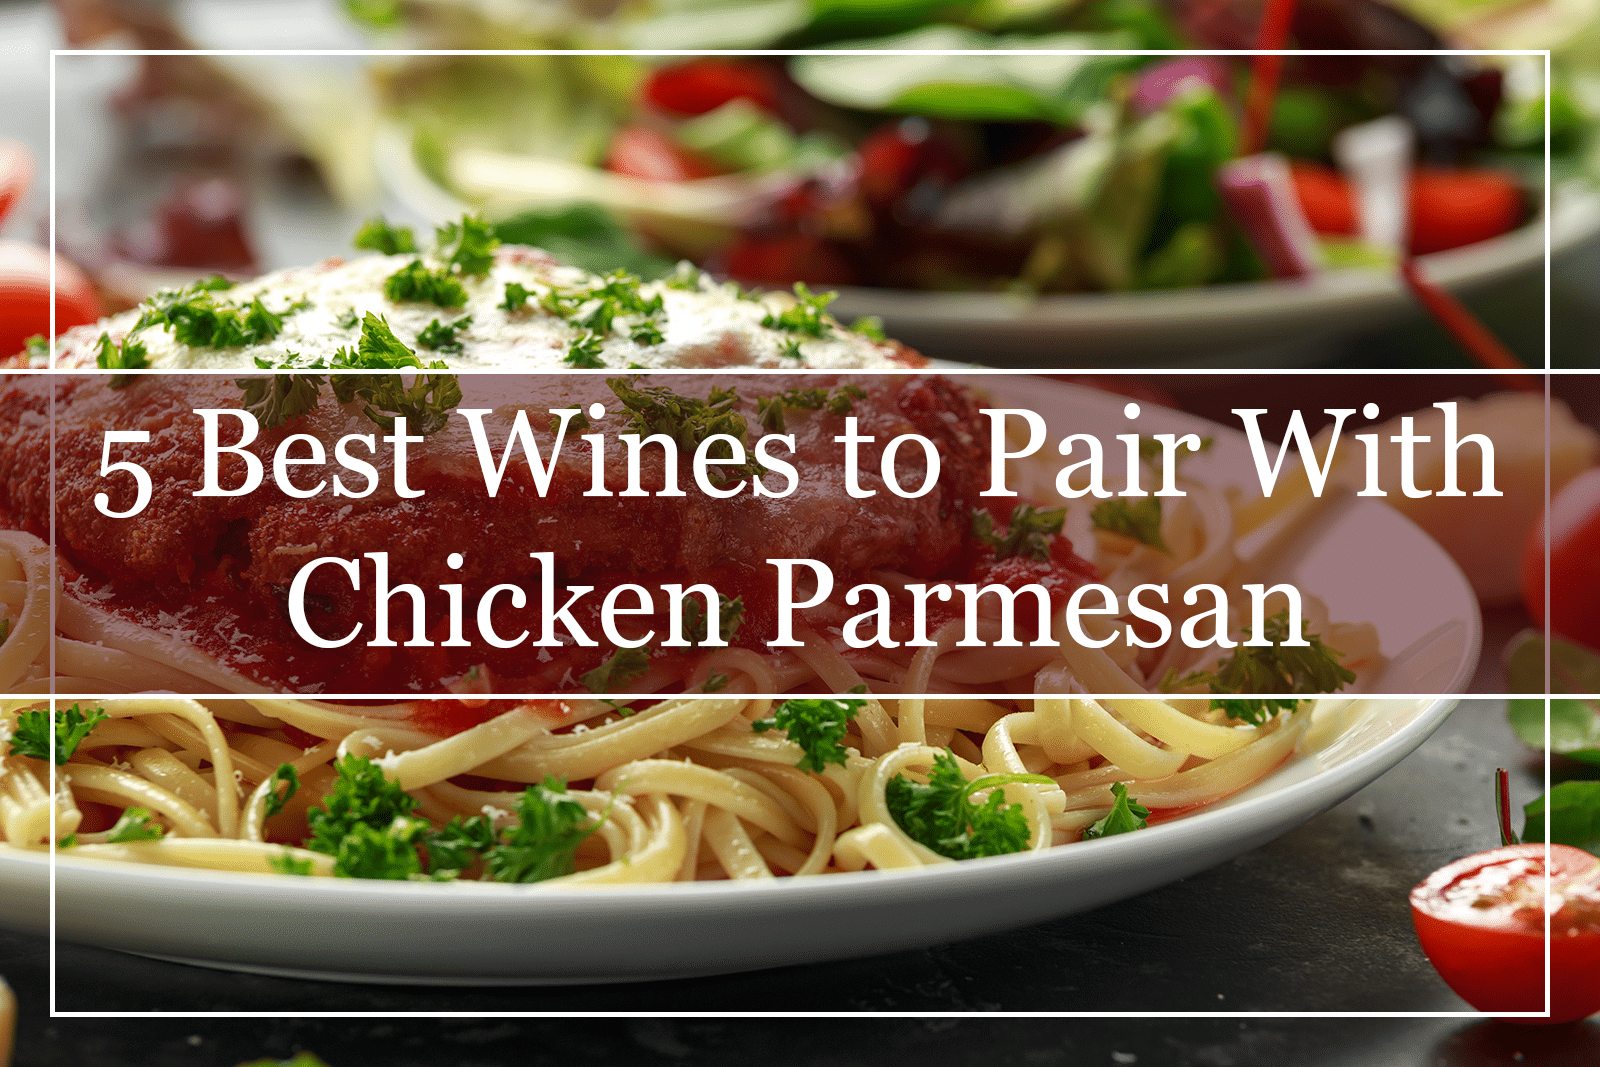 5 Best Wines to Pair With Chicken Parmesan (2021)